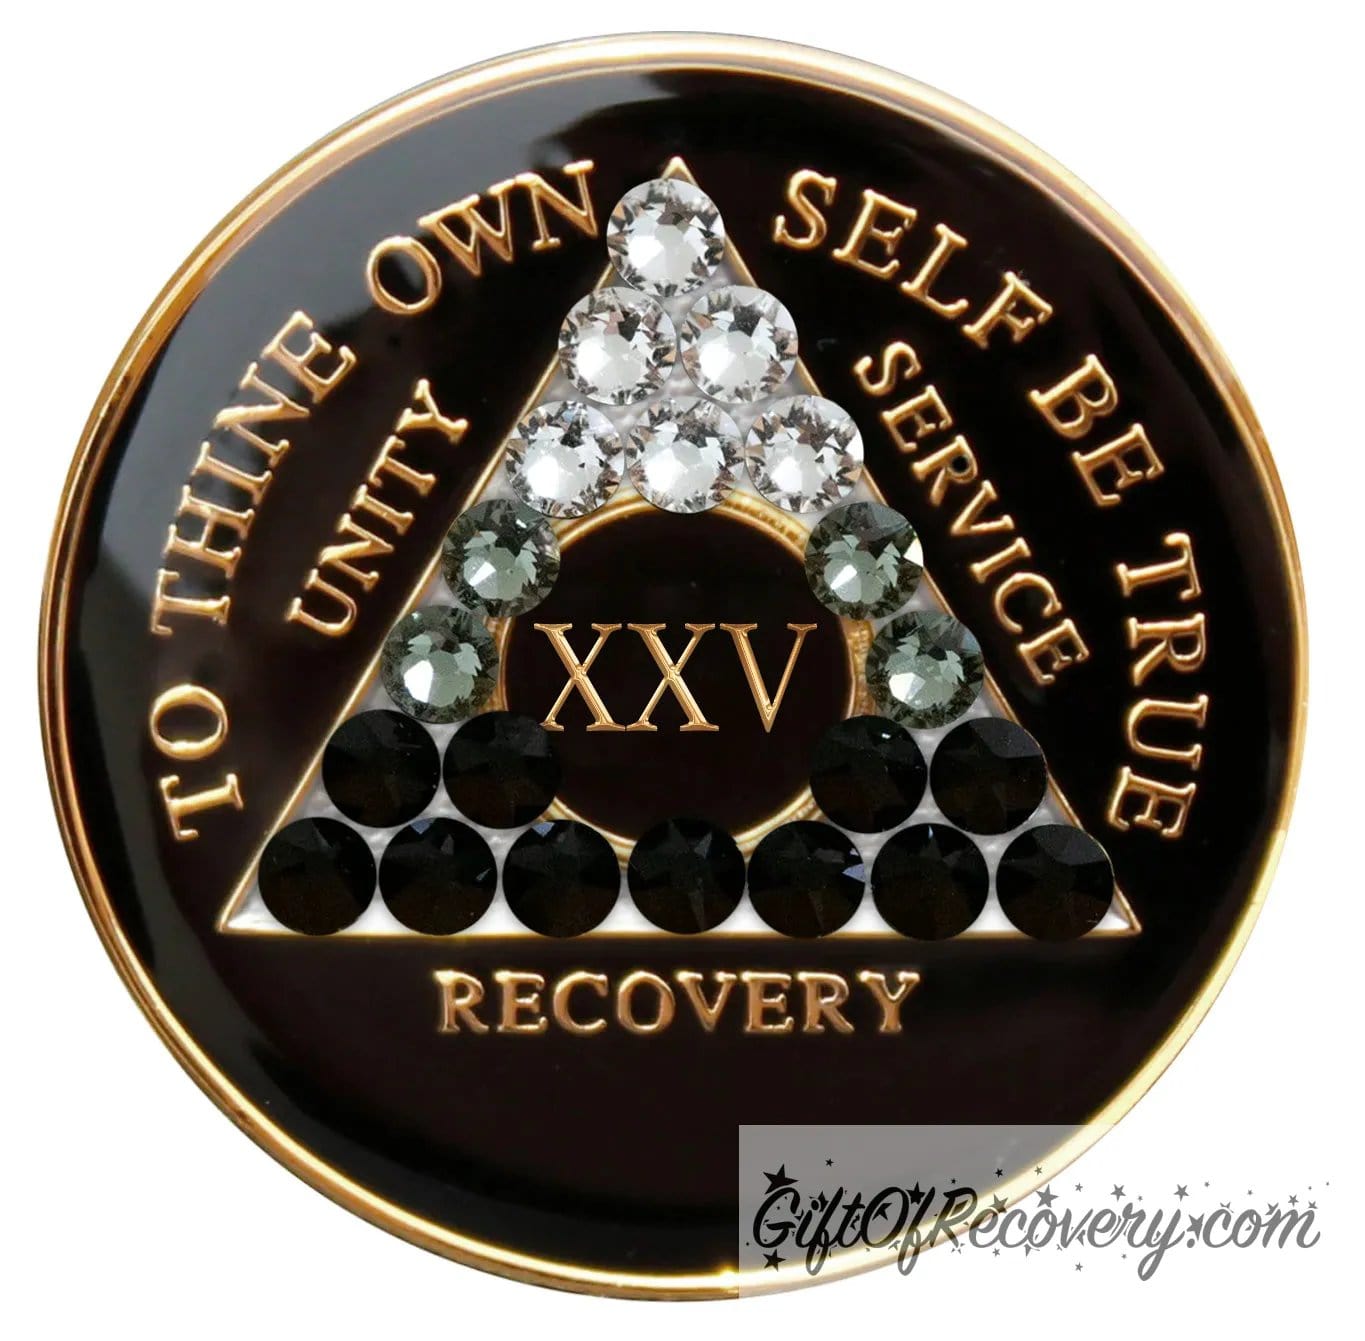 25 year AA recovery medallion black onyx with 21 genuine crystals ranging from clear to grey, to black, representing the transformation of the recovery journey, the AA moto along with unity, service, recovery, roman numeral, and the outer rim of medallion are embossed with 14k gold plated bras, the medallion is sealed in resin for a glossy finish.